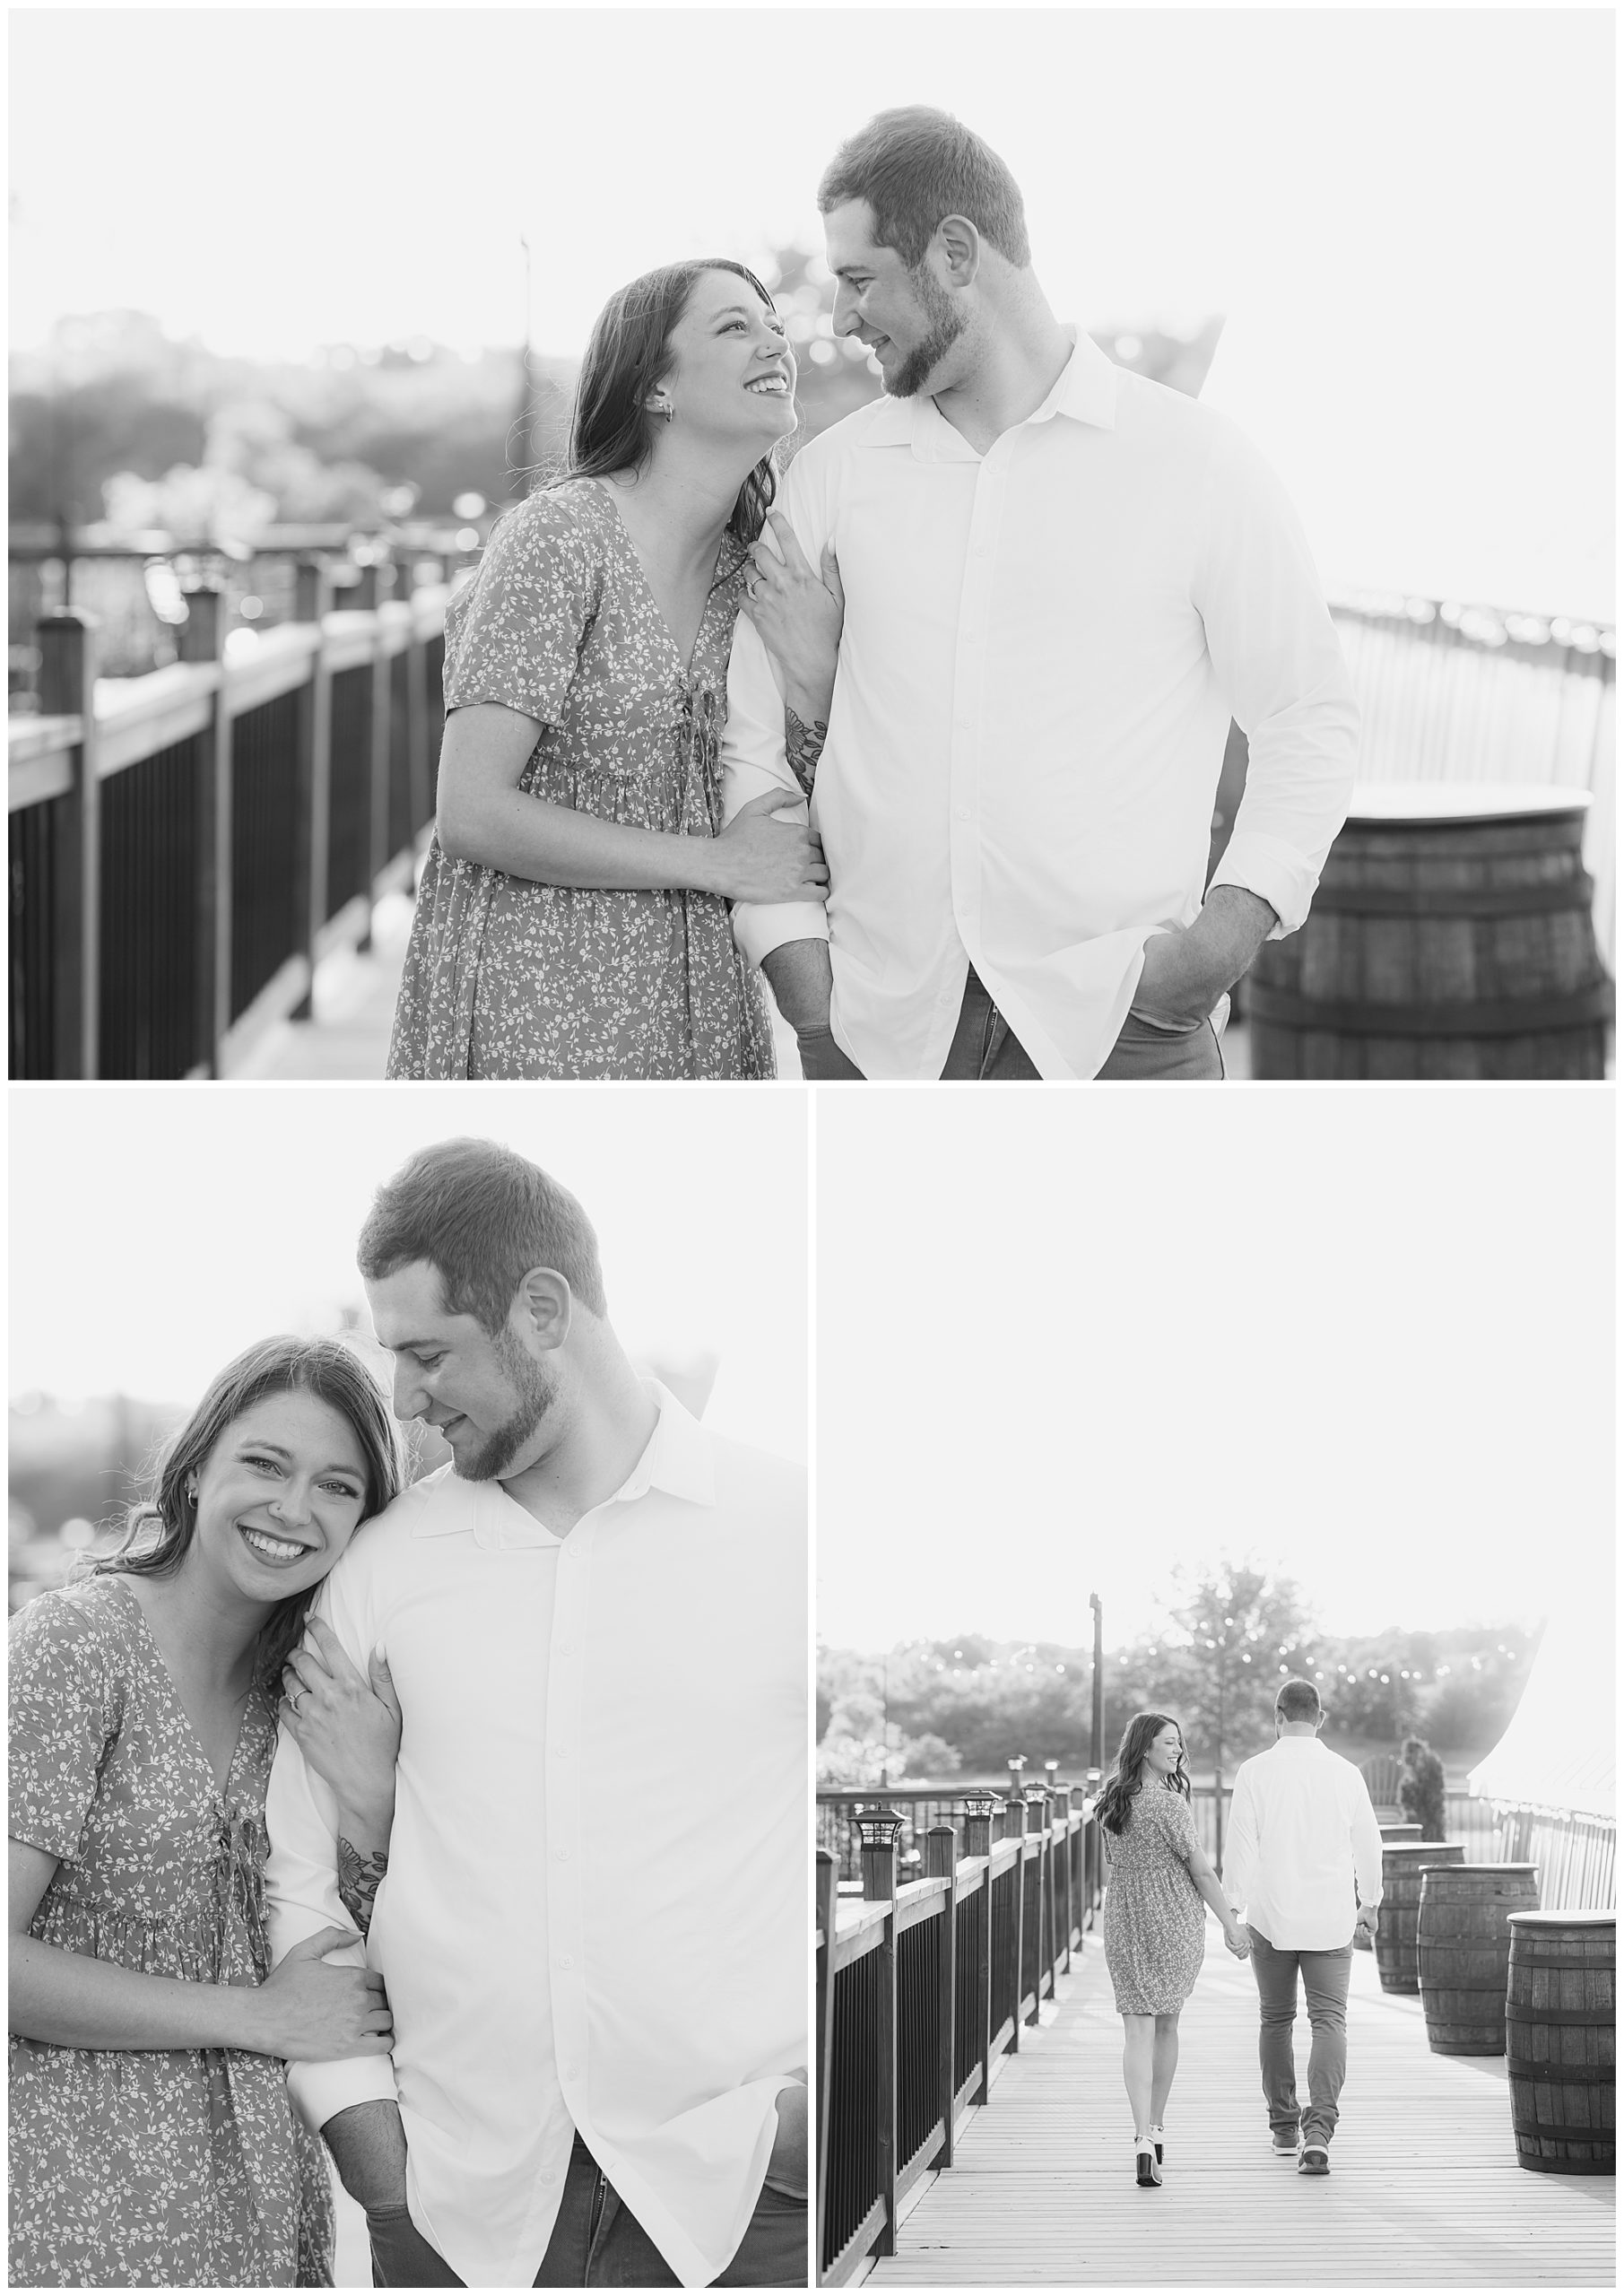 Romantic Engagement Session with Kuffel Photography